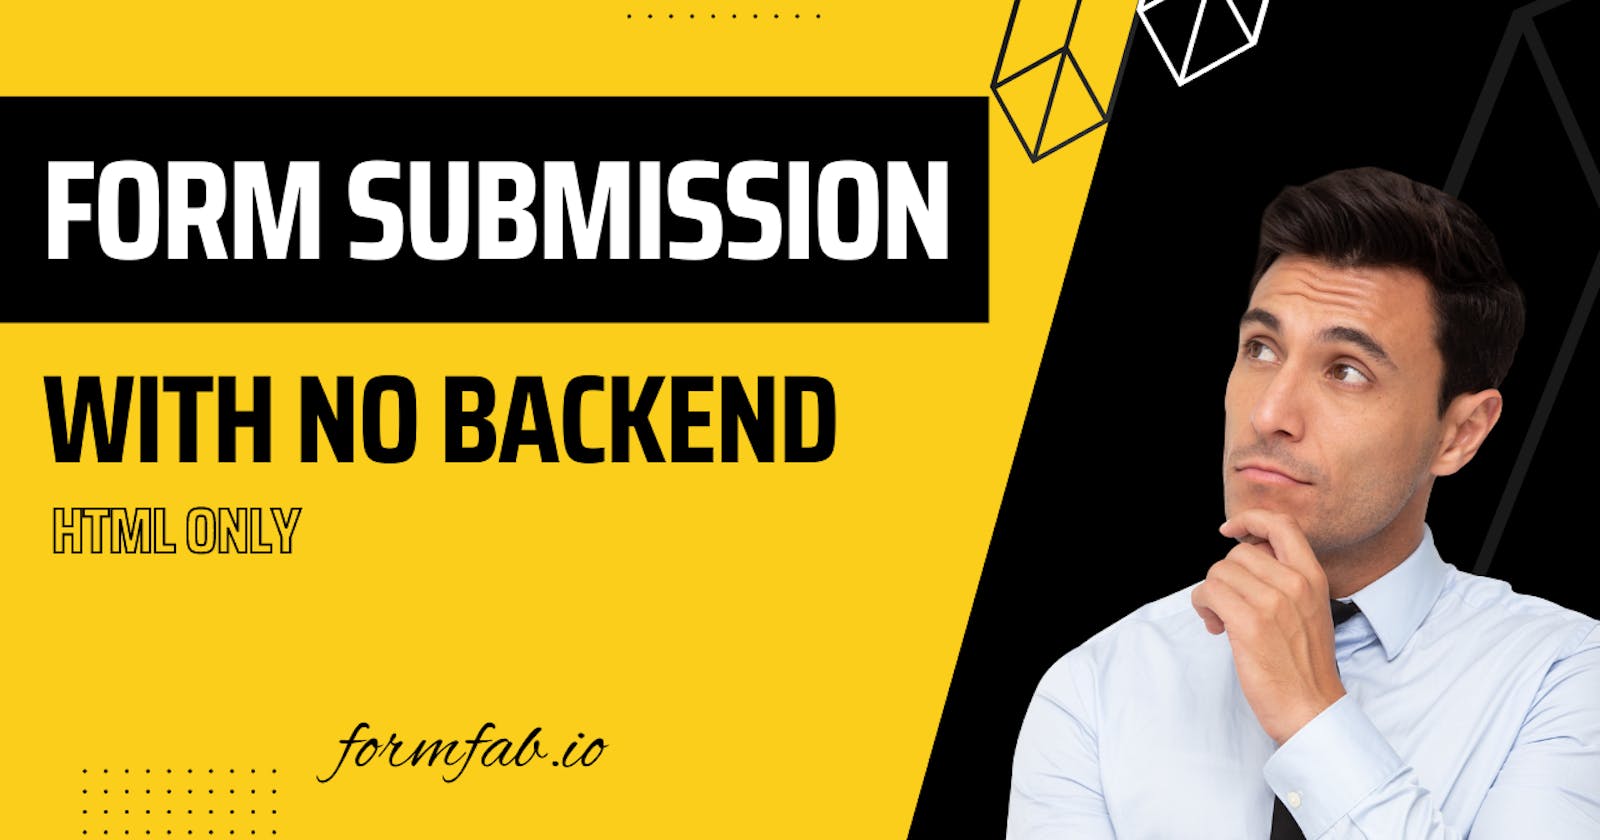 Send email without backend after form submission